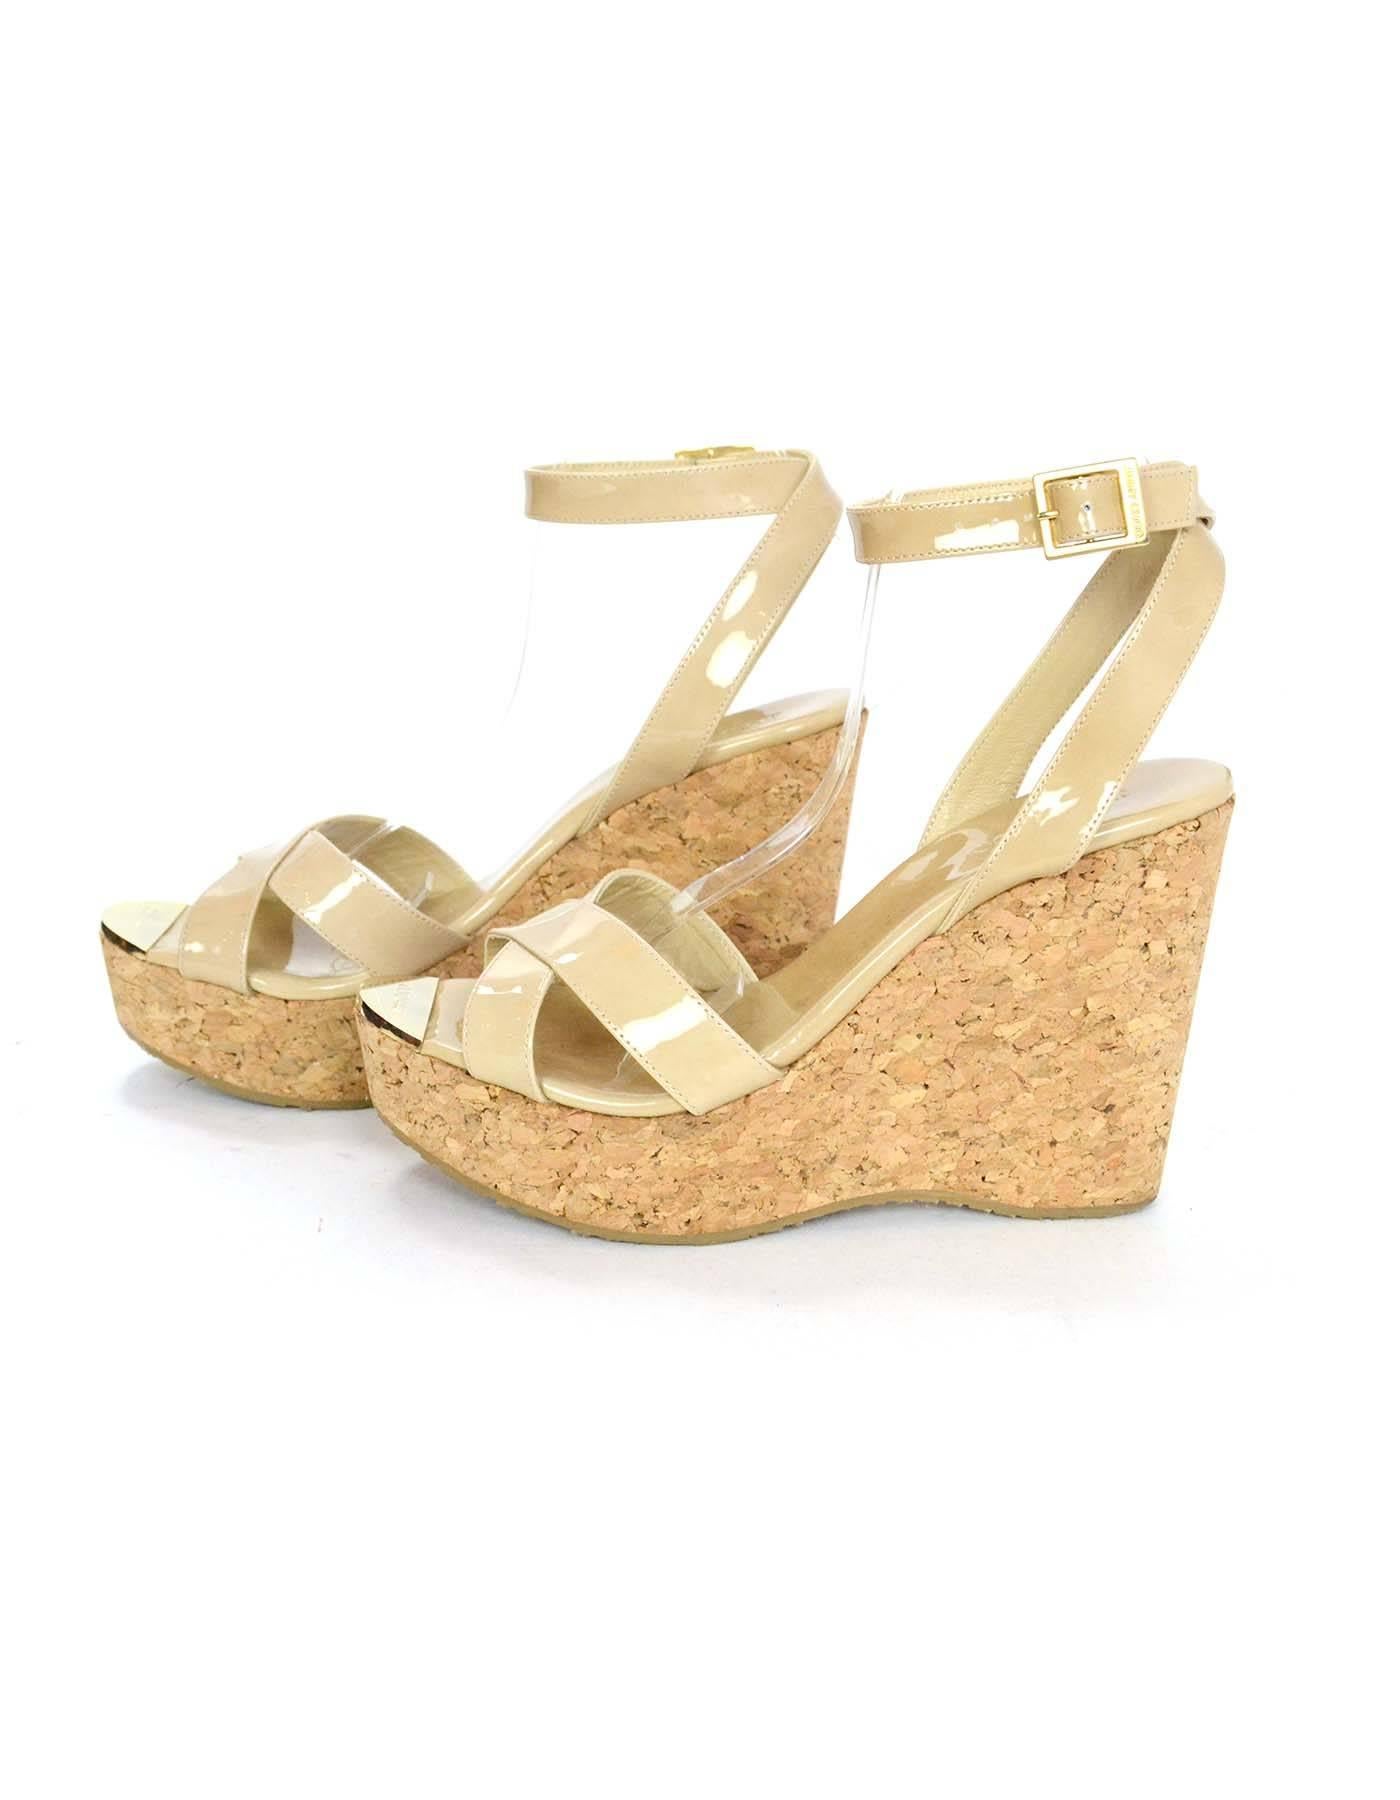 Jimmy Choo Patent Leather Nude and Cork Wedges Sz 39

Made In: Spain
Color: Nude
Materials: Patent leather
Closure/Opening: Ankle strap with buckle closure
Sole Stamp: Jimmy Choo Made in Spain 39
Overall Condition: Excellent pre-owned